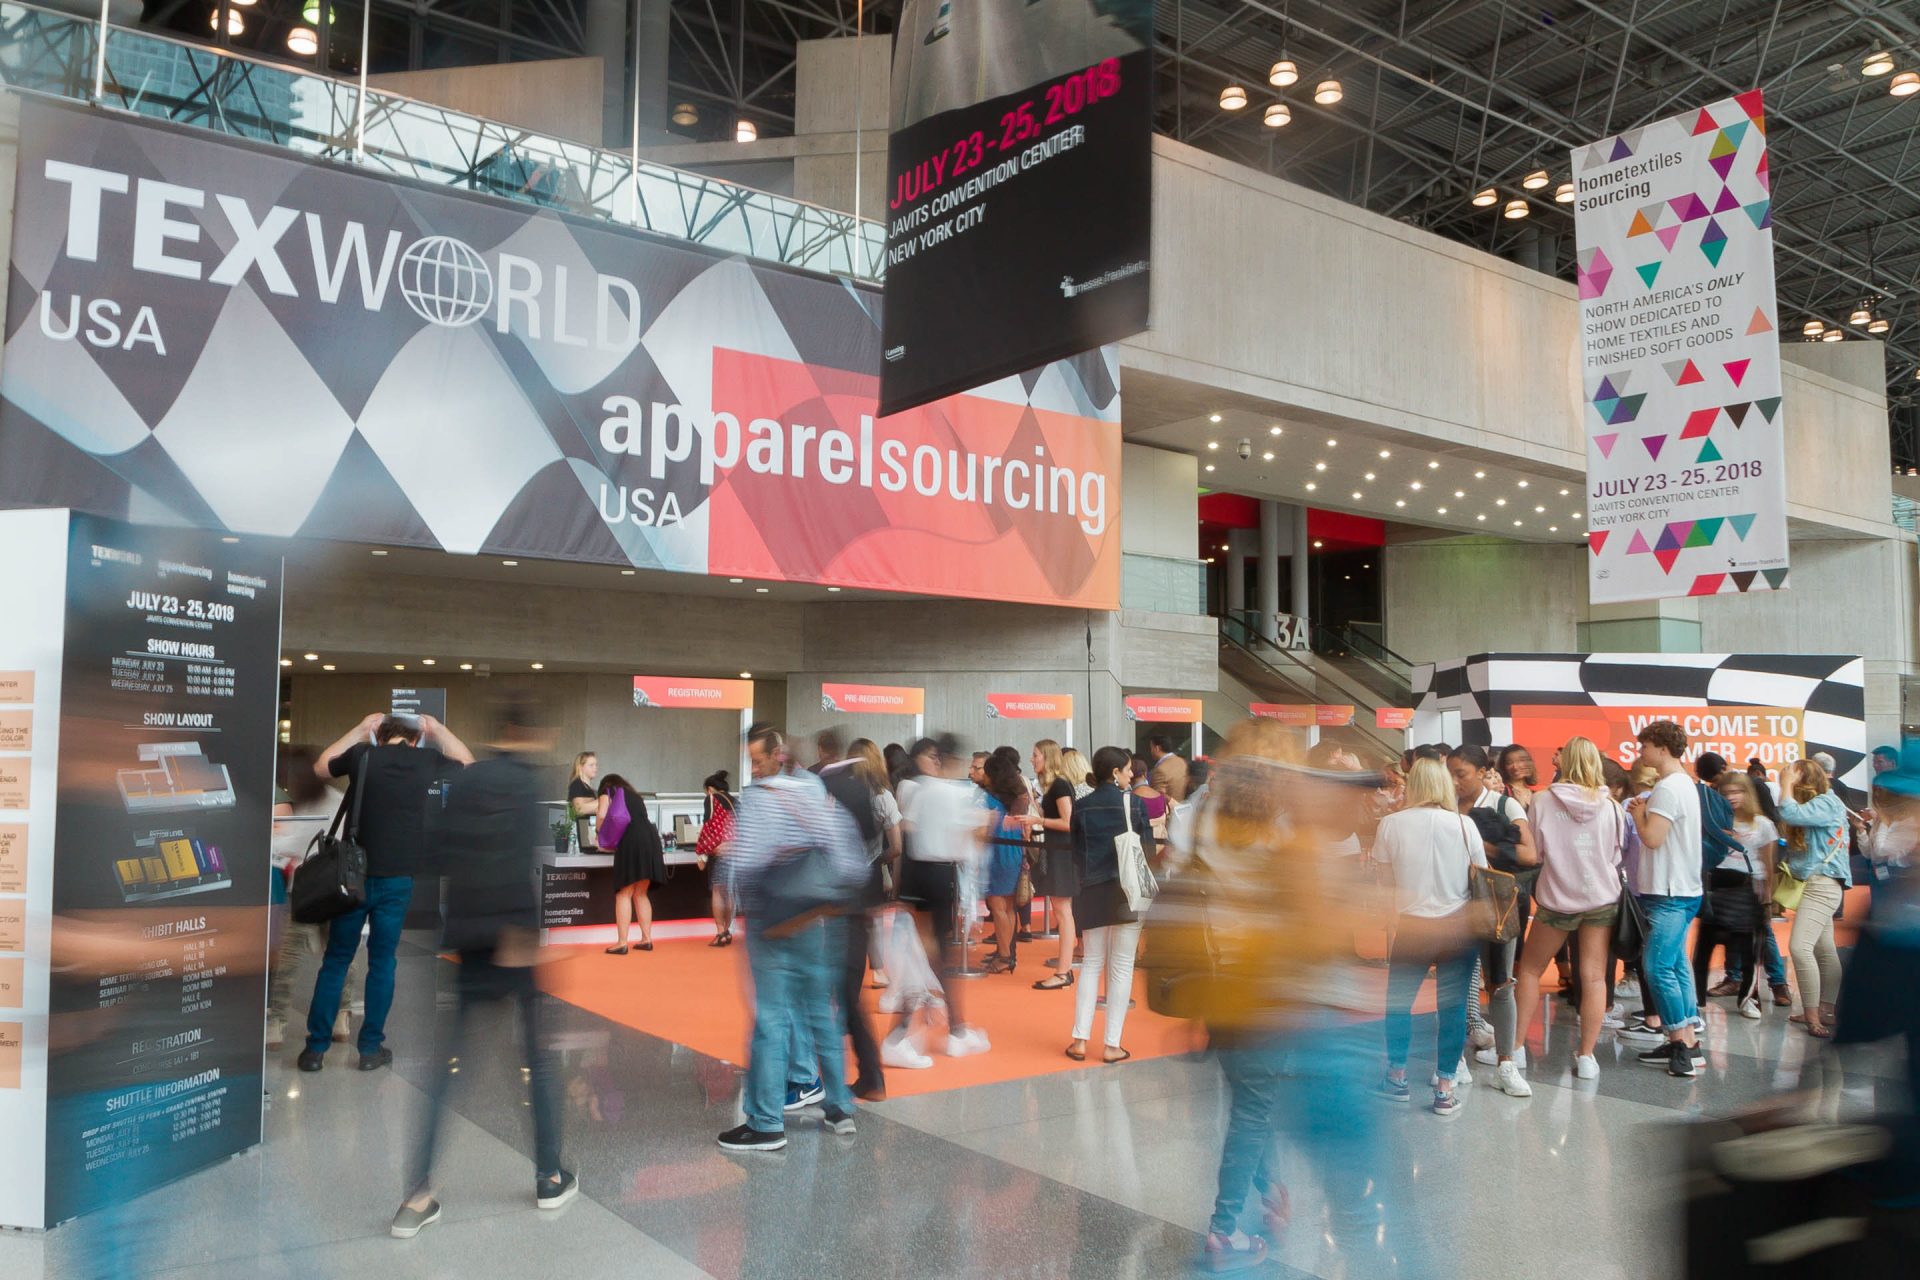 Texworld USA, Apparel Sourcing USA and Home Textiles Sourcing Summer 2018 featured 837 exhibitors representing 19 countries. © Messe Frankfurt/Texworld USA